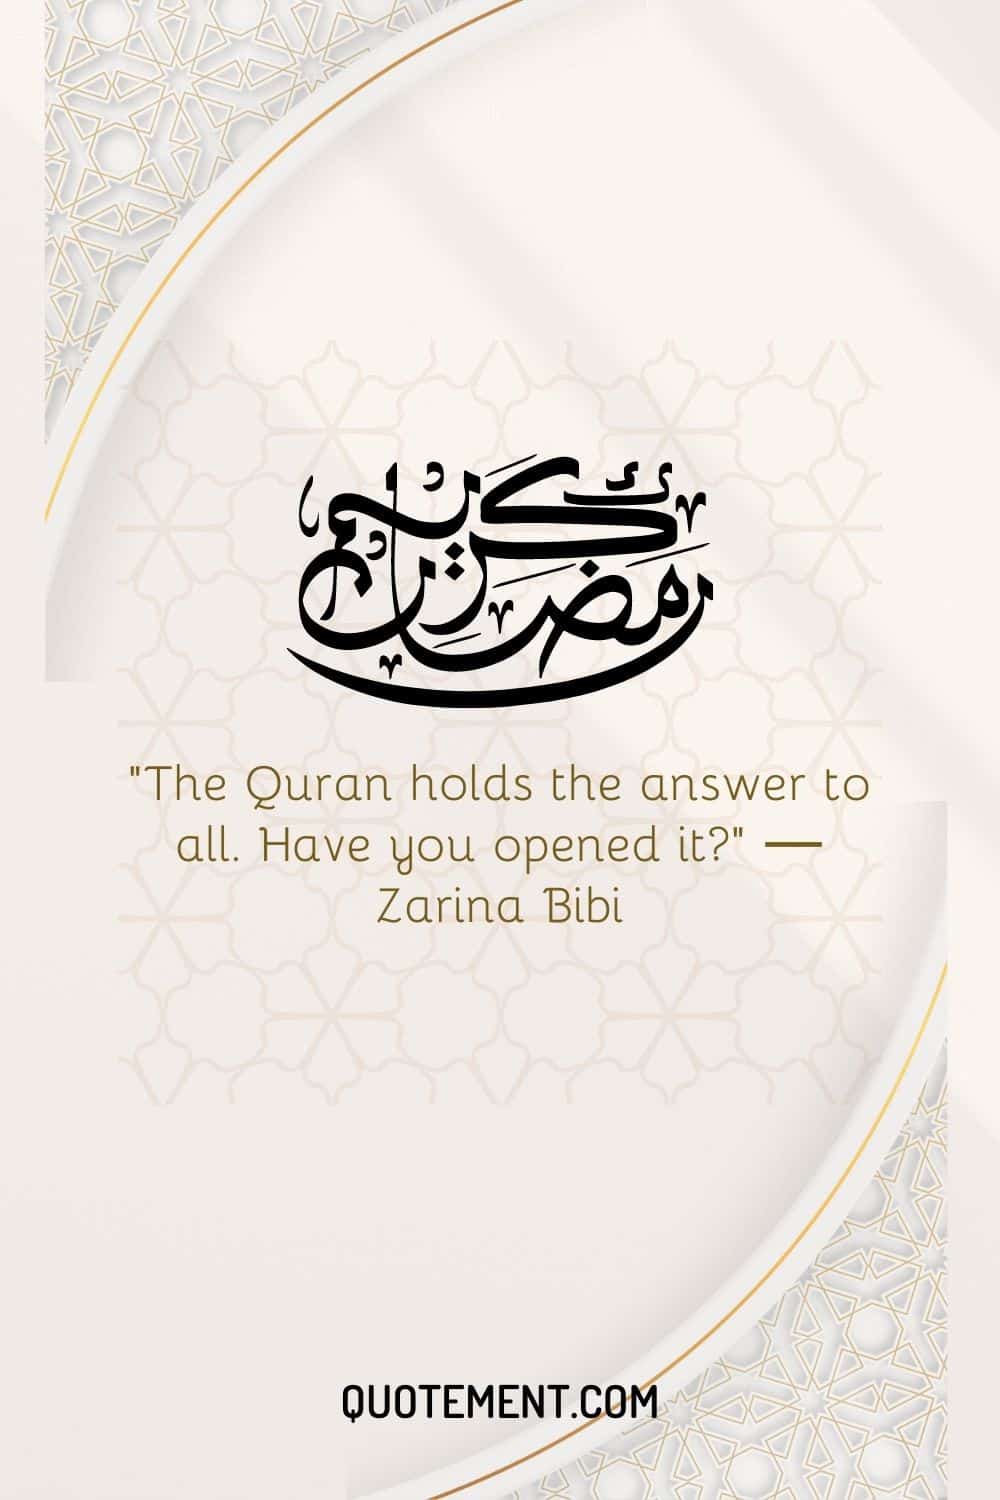 The Quran holds the answer to all. Have you opened it